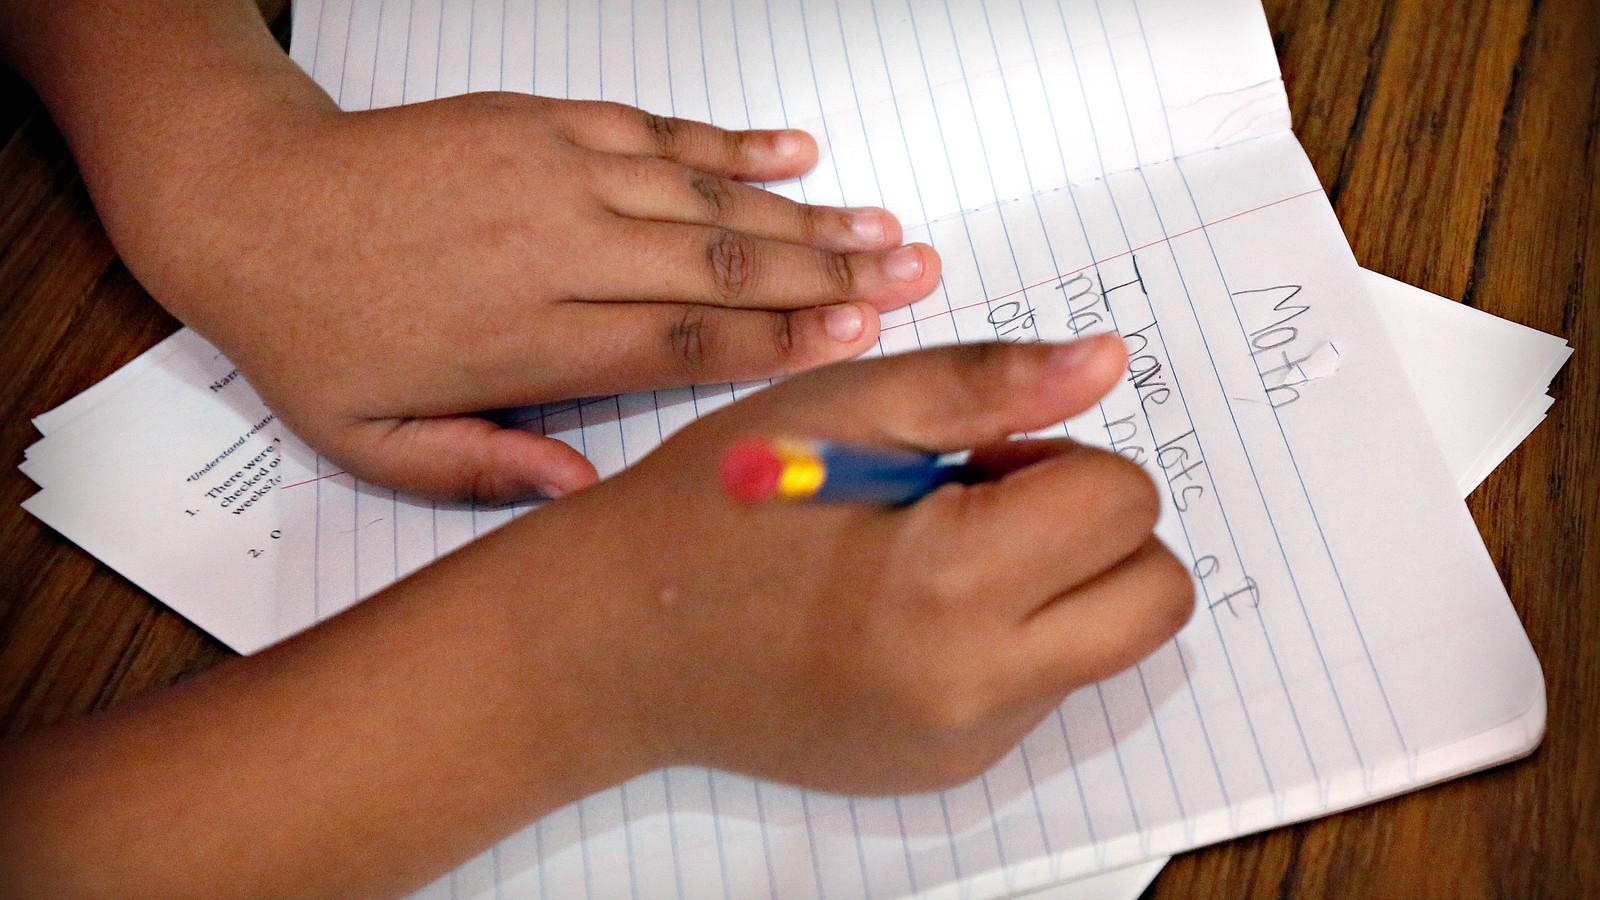 The Common Core-Inspired “Explain Your Answers” Rule In Math Is Misguided - The Atlantic